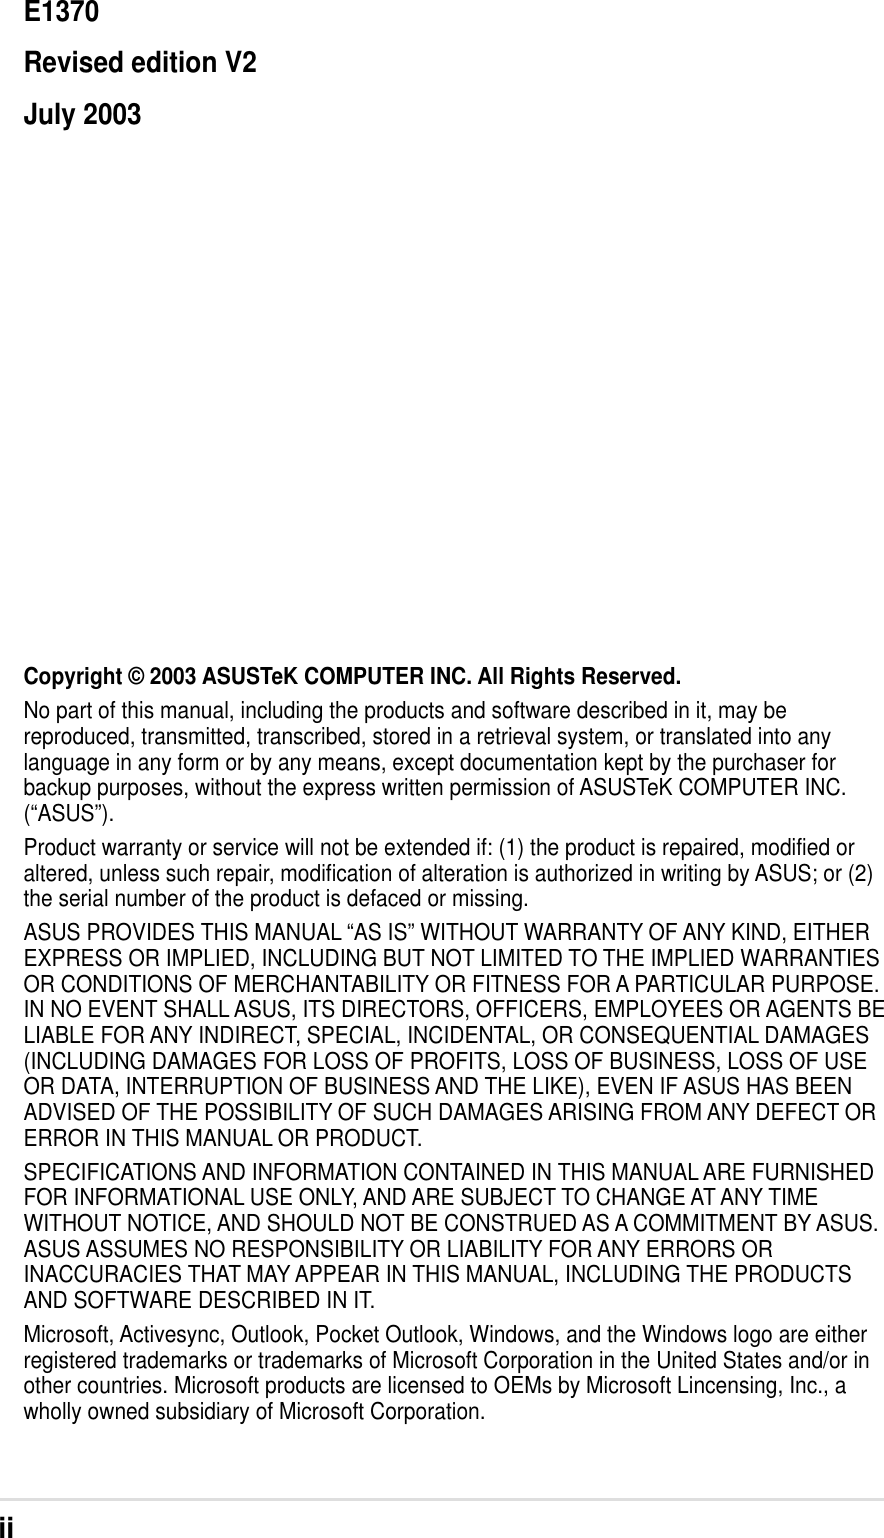 iiCopyright © 2003 ASUSTeK COMPUTER INC. All Rights Reserved.No part of this manual, including the products and software described in it, may bereproduced, transmitted, transcribed, stored in a retrieval system, or translated into anylanguage in any form or by any means, except documentation kept by the purchaser forbackup purposes, without the express written permission of ASUSTeK COMPUTER INC.(“ASUS”).Product warranty or service will not be extended if: (1) the product is repaired, modified oraltered, unless such repair, modification of alteration is authorized in writing by ASUS; or (2)the serial number of the product is defaced or missing.ASUS PROVIDES THIS MANUAL “AS IS” WITHOUT WARRANTY OF ANY KIND, EITHEREXPRESS OR IMPLIED, INCLUDING BUT NOT LIMITED TO THE IMPLIED WARRANTIESOR CONDITIONS OF MERCHANTABILITY OR FITNESS FOR A PARTICULAR PURPOSE.IN NO EVENT SHALL ASUS, ITS DIRECTORS, OFFICERS, EMPLOYEES OR AGENTS BELIABLE FOR ANY INDIRECT, SPECIAL, INCIDENTAL, OR CONSEQUENTIAL DAMAGES(INCLUDING DAMAGES FOR LOSS OF PROFITS, LOSS OF BUSINESS, LOSS OF USEOR DATA, INTERRUPTION OF BUSINESS AND THE LIKE), EVEN IF ASUS HAS BEENADVISED OF THE POSSIBILITY OF SUCH DAMAGES ARISING FROM ANY DEFECT ORERROR IN THIS MANUAL OR PRODUCT.SPECIFICATIONS AND INFORMATION CONTAINED IN THIS MANUAL ARE FURNISHEDFOR INFORMATIONAL USE ONLY, AND ARE SUBJECT TO CHANGE AT ANY TIMEWITHOUT NOTICE, AND SHOULD NOT BE CONSTRUED AS A COMMITMENT BY ASUS.ASUS ASSUMES NO RESPONSIBILITY OR LIABILITY FOR ANY ERRORS ORINACCURACIES THAT MAY APPEAR IN THIS MANUAL, INCLUDING THE PRODUCTSAND SOFTWARE DESCRIBED IN IT.Microsoft, Activesync, Outlook, Pocket Outlook, Windows, and the Windows logo are eitherregistered trademarks or trademarks of Microsoft Corporation in the United States and/or inother countries. Microsoft products are licensed to OEMs by Microsoft Lincensing, Inc., awholly owned subsidiary of Microsoft Corporation.E1370Revised edition V2July 2003